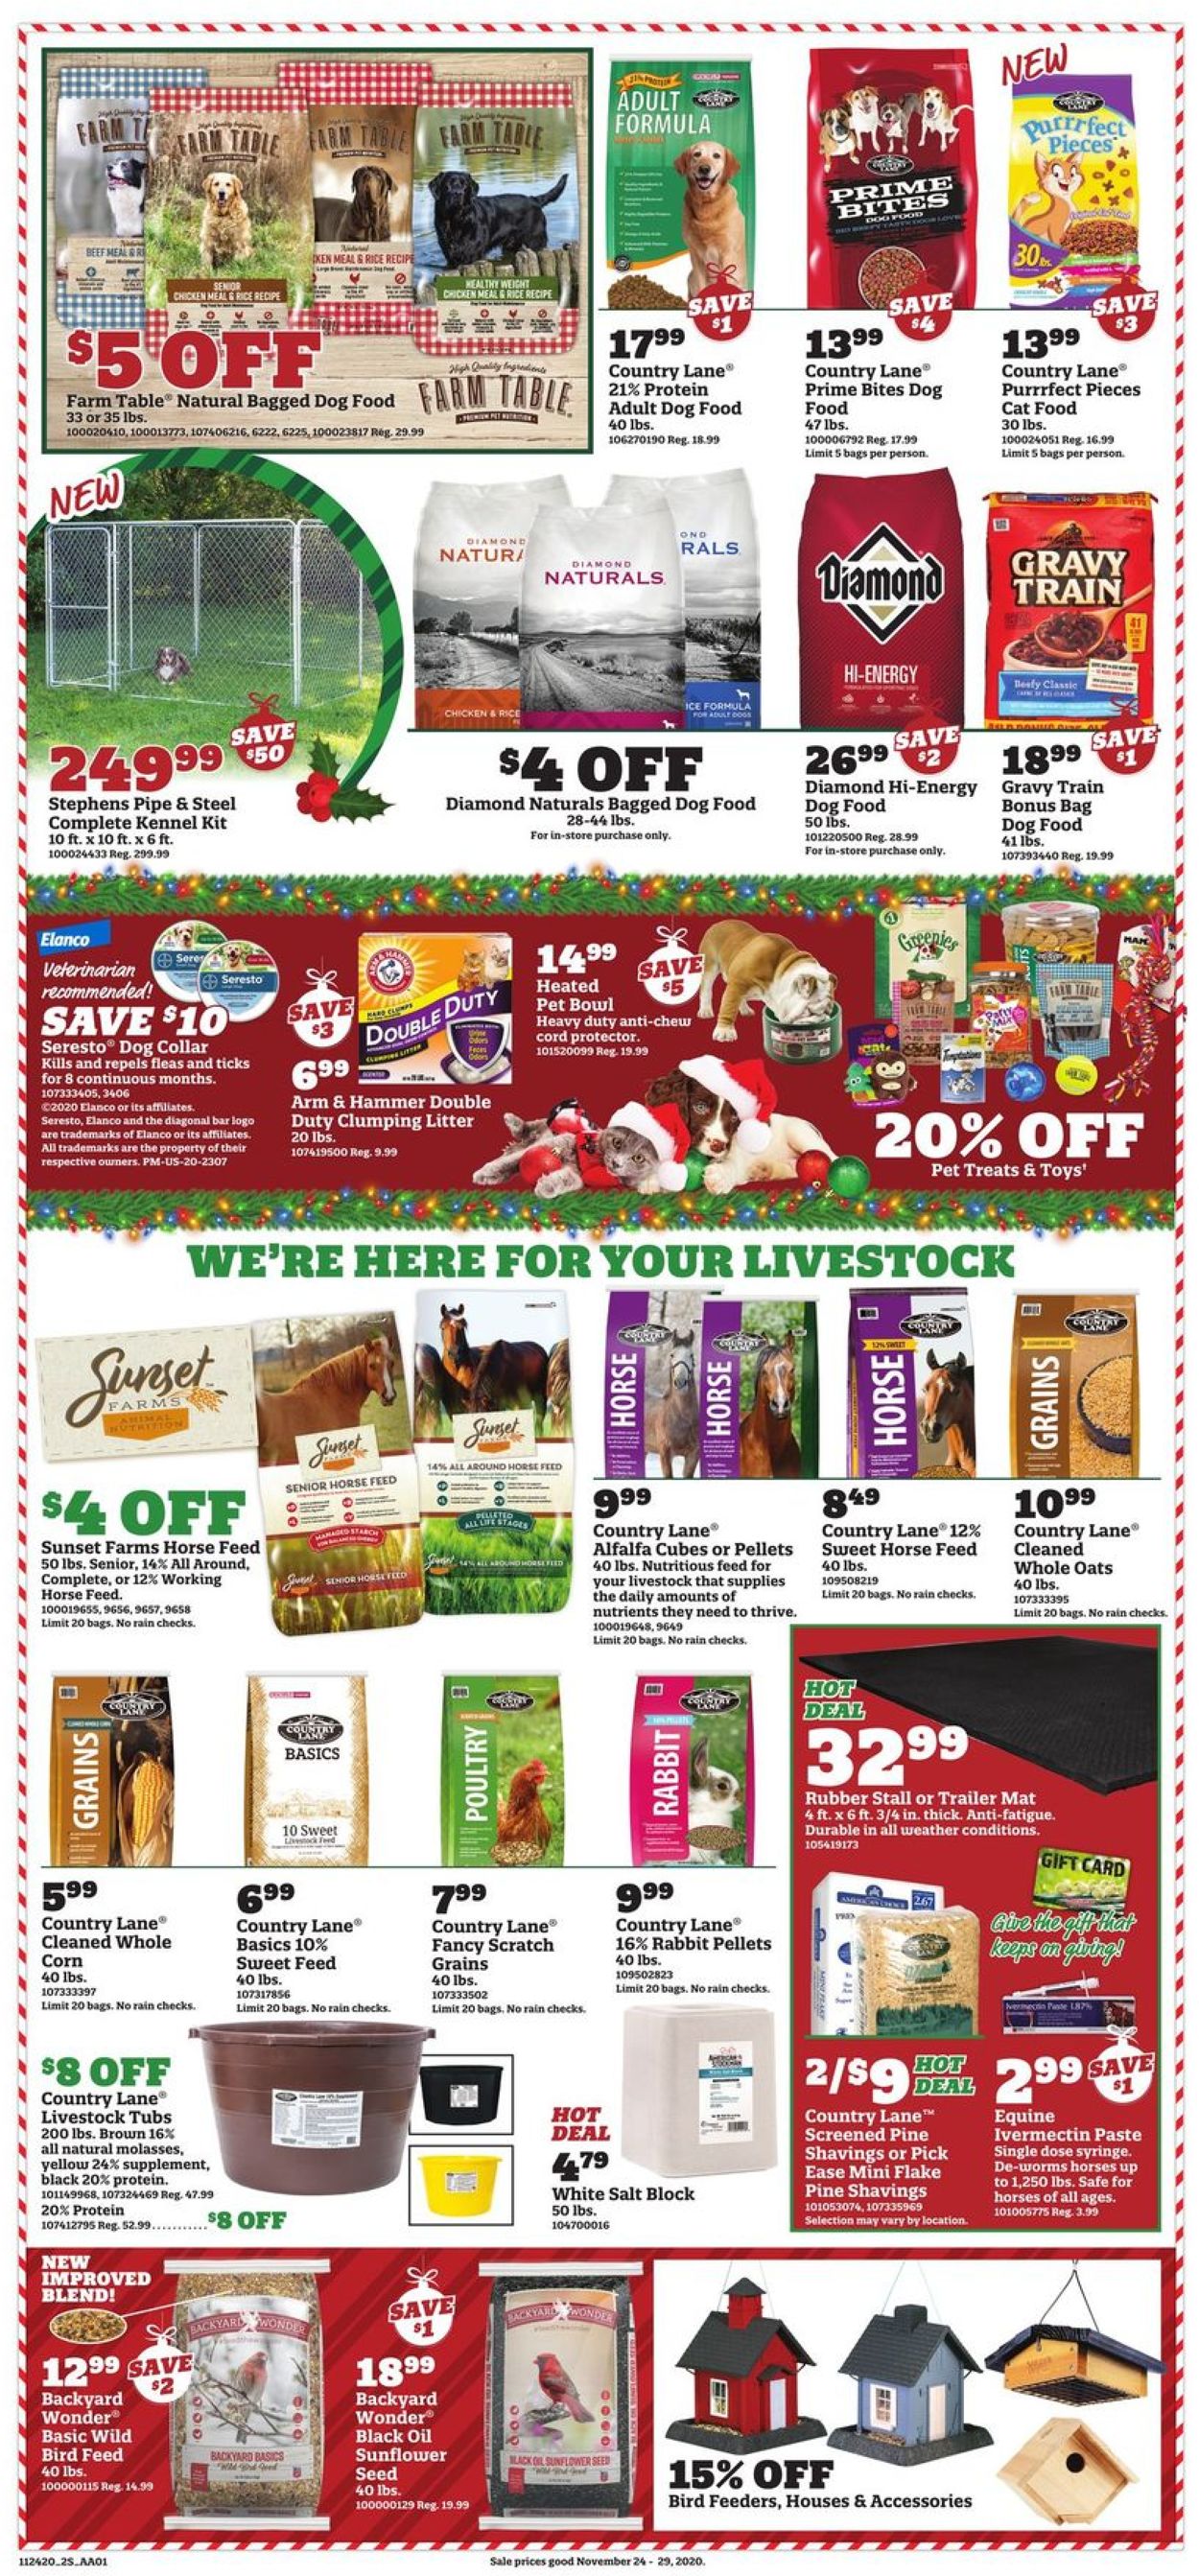 Orscheln Farm and Home - Black Friday Ad 2020 Weekly Ad Circular - valid 11/24-11/29/2020 (Page 3)